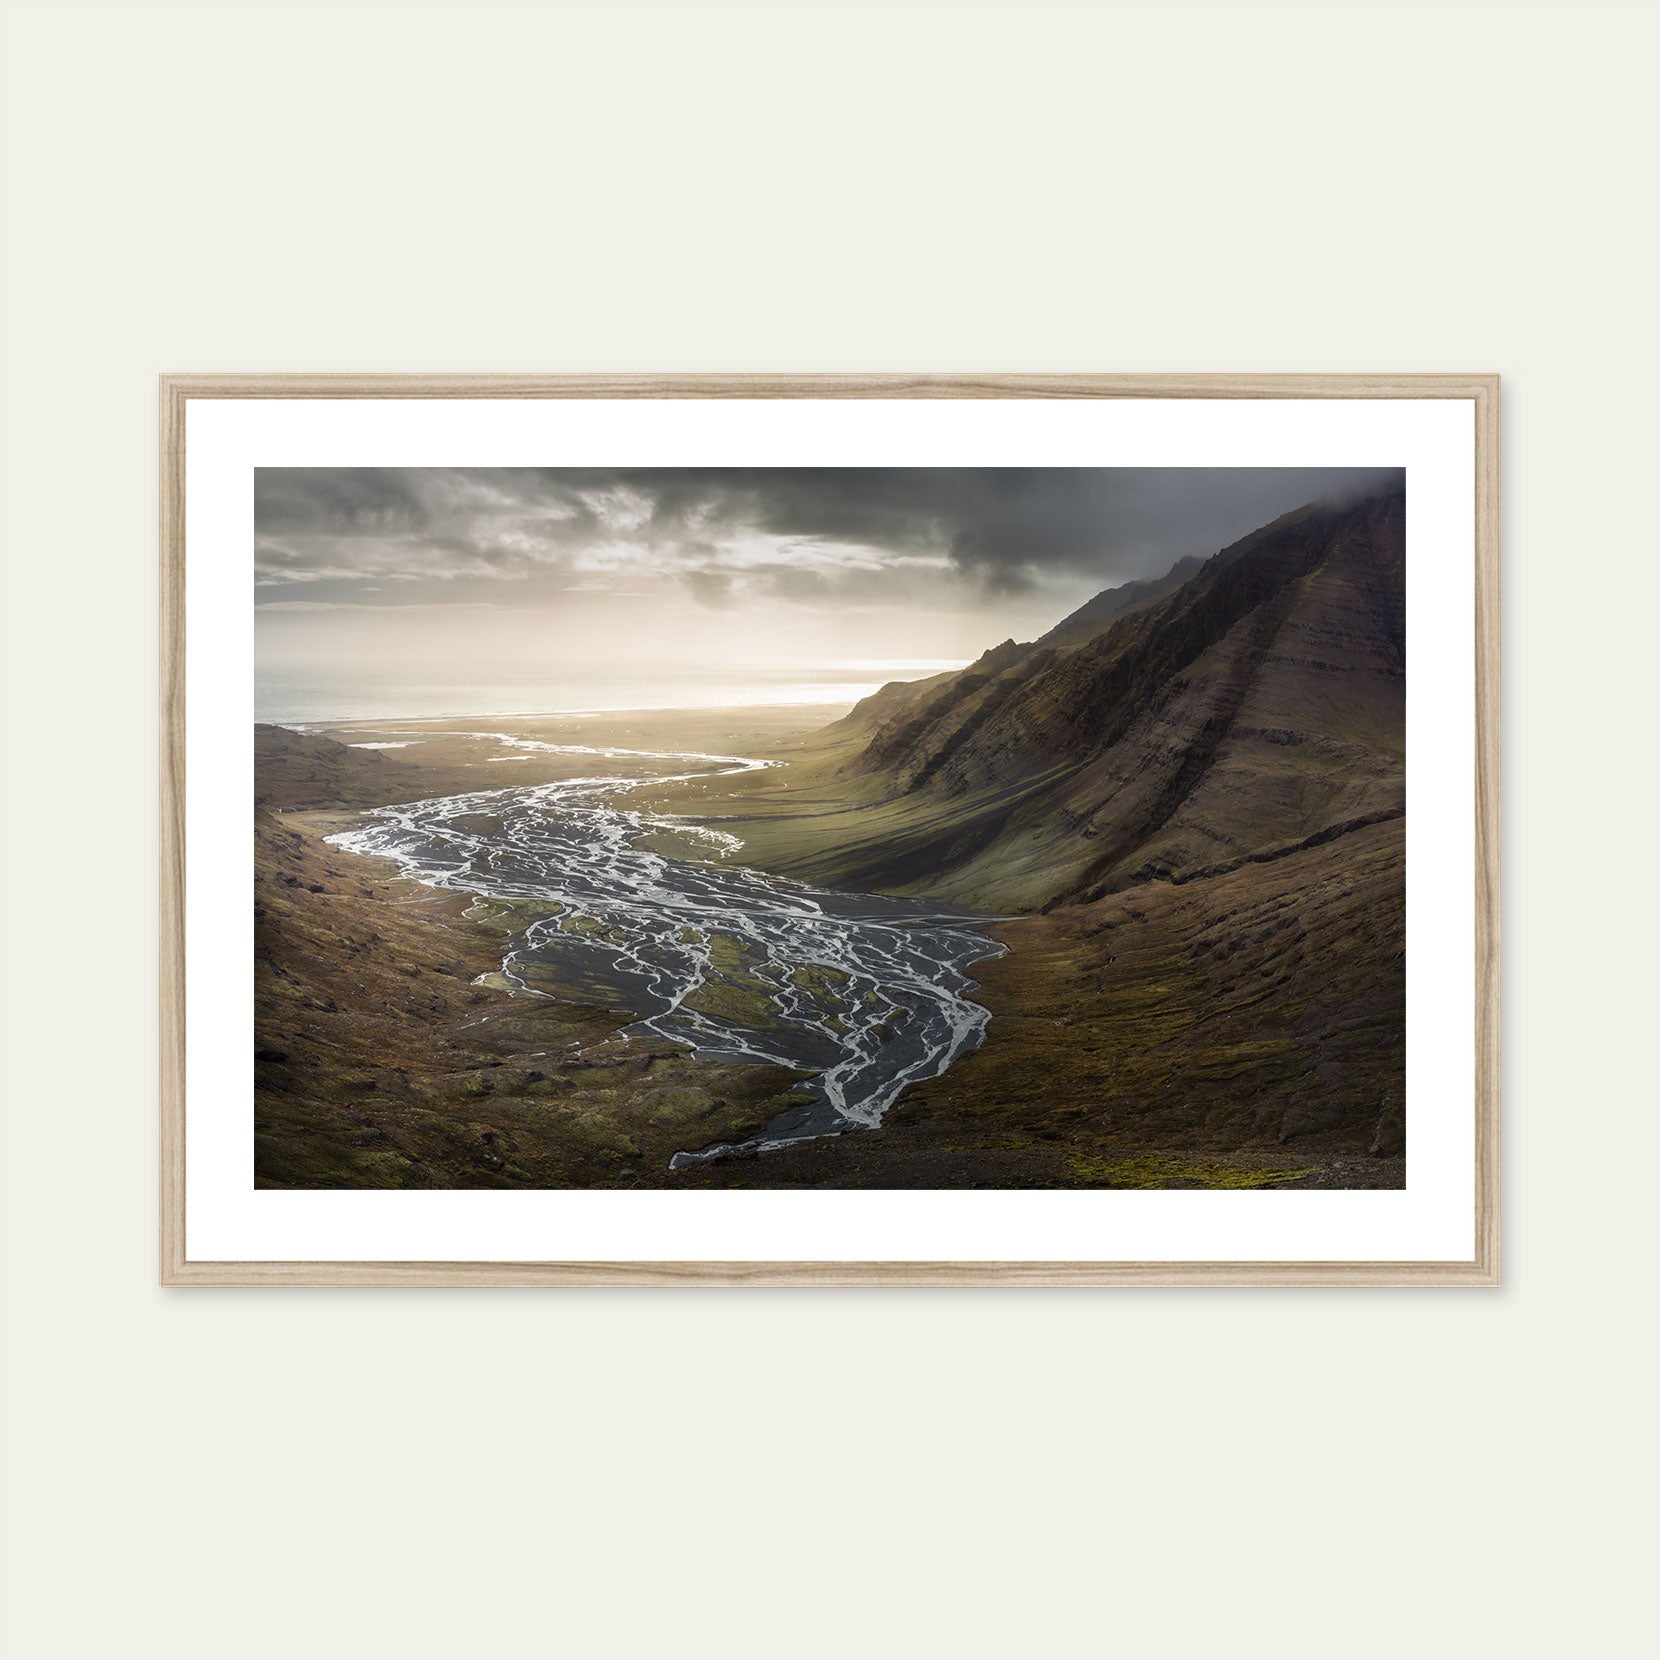 A wood framed print of a valley in the south of Iceland